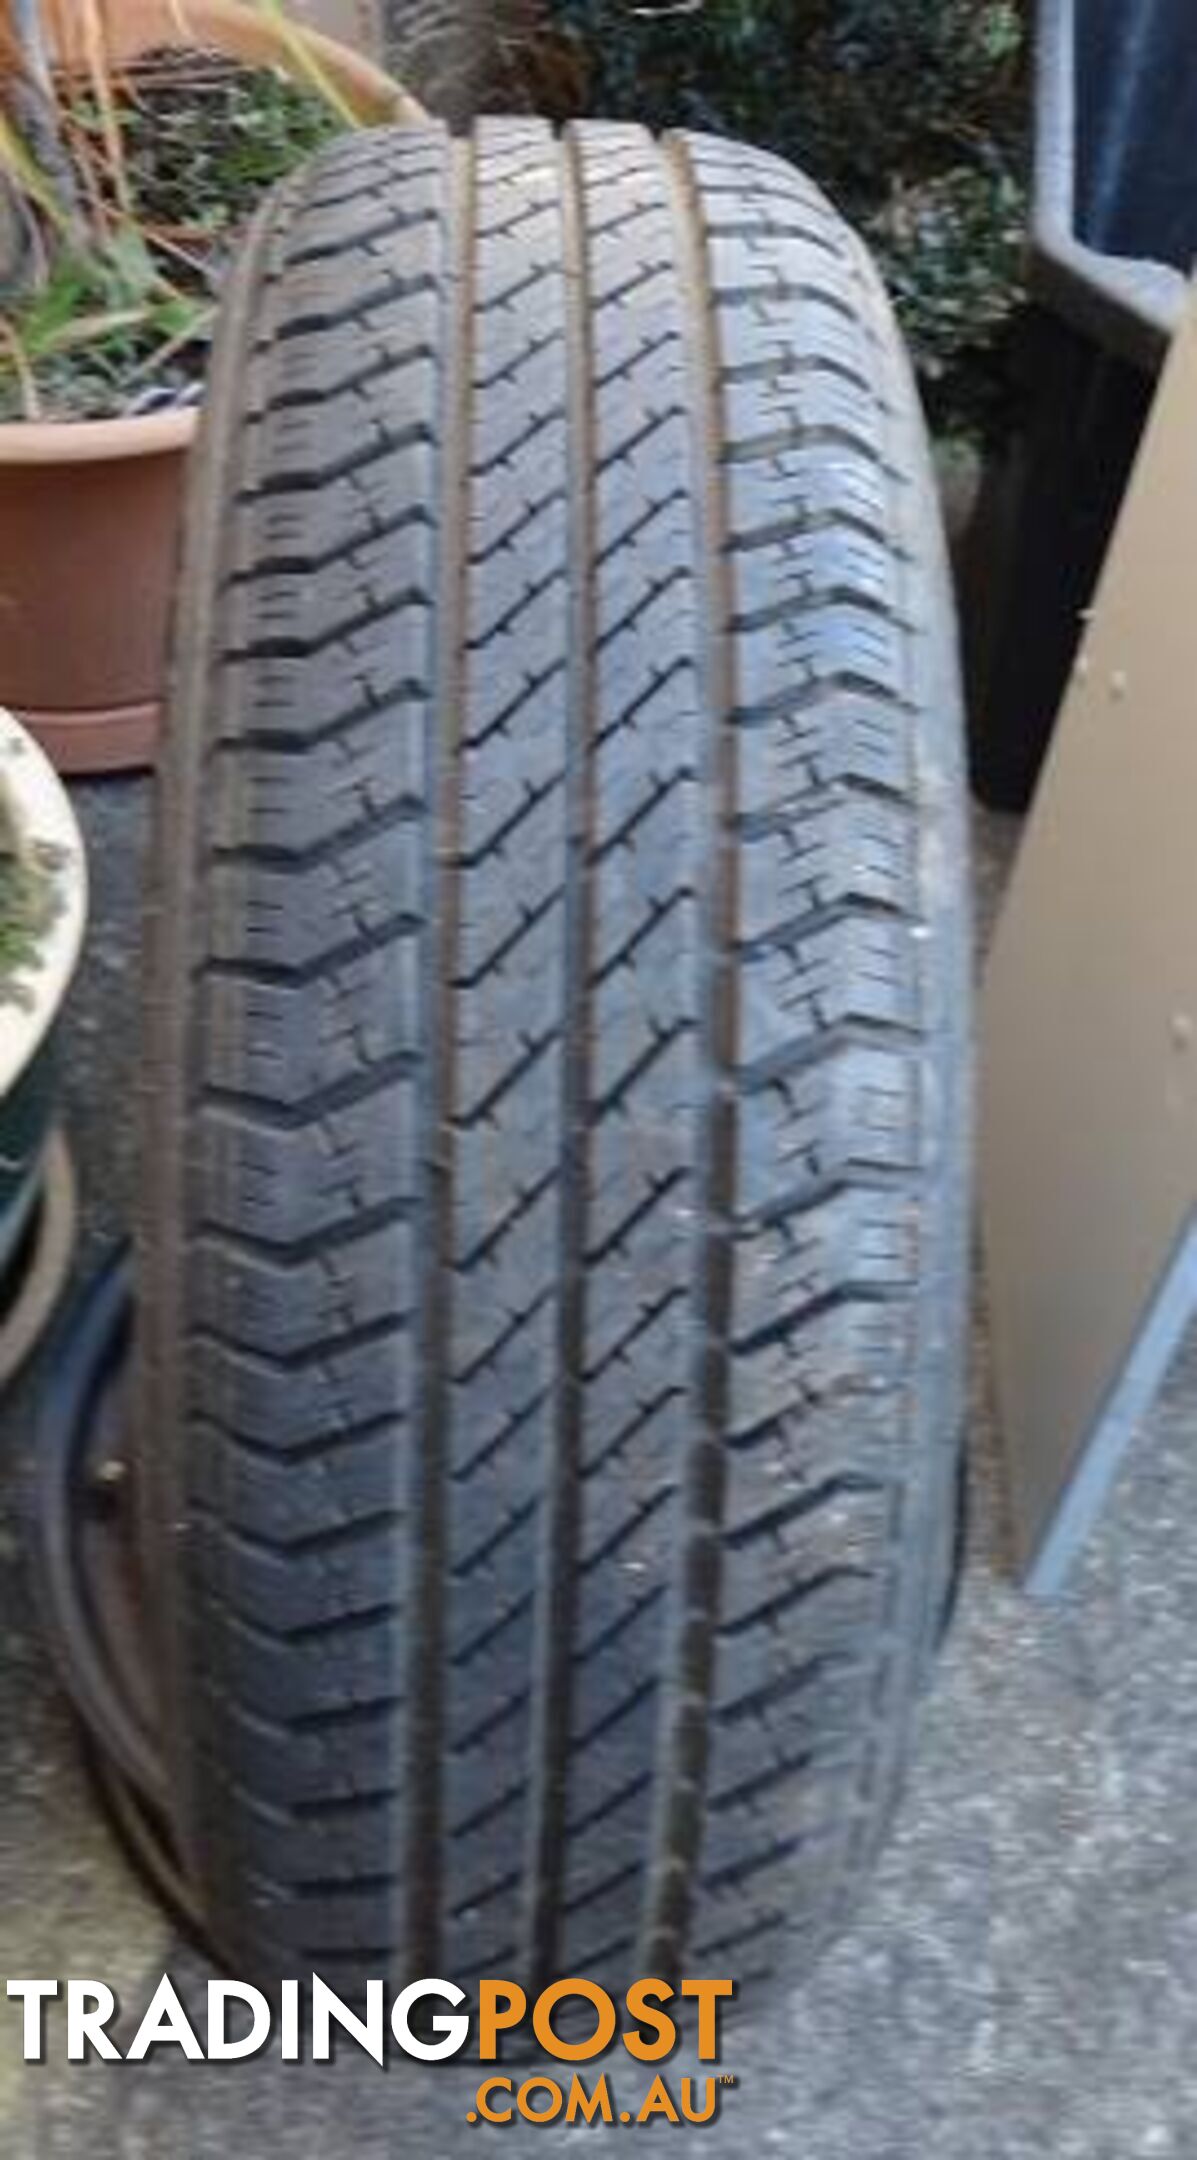 NEW 15" RADIAL TYRES. From: $50